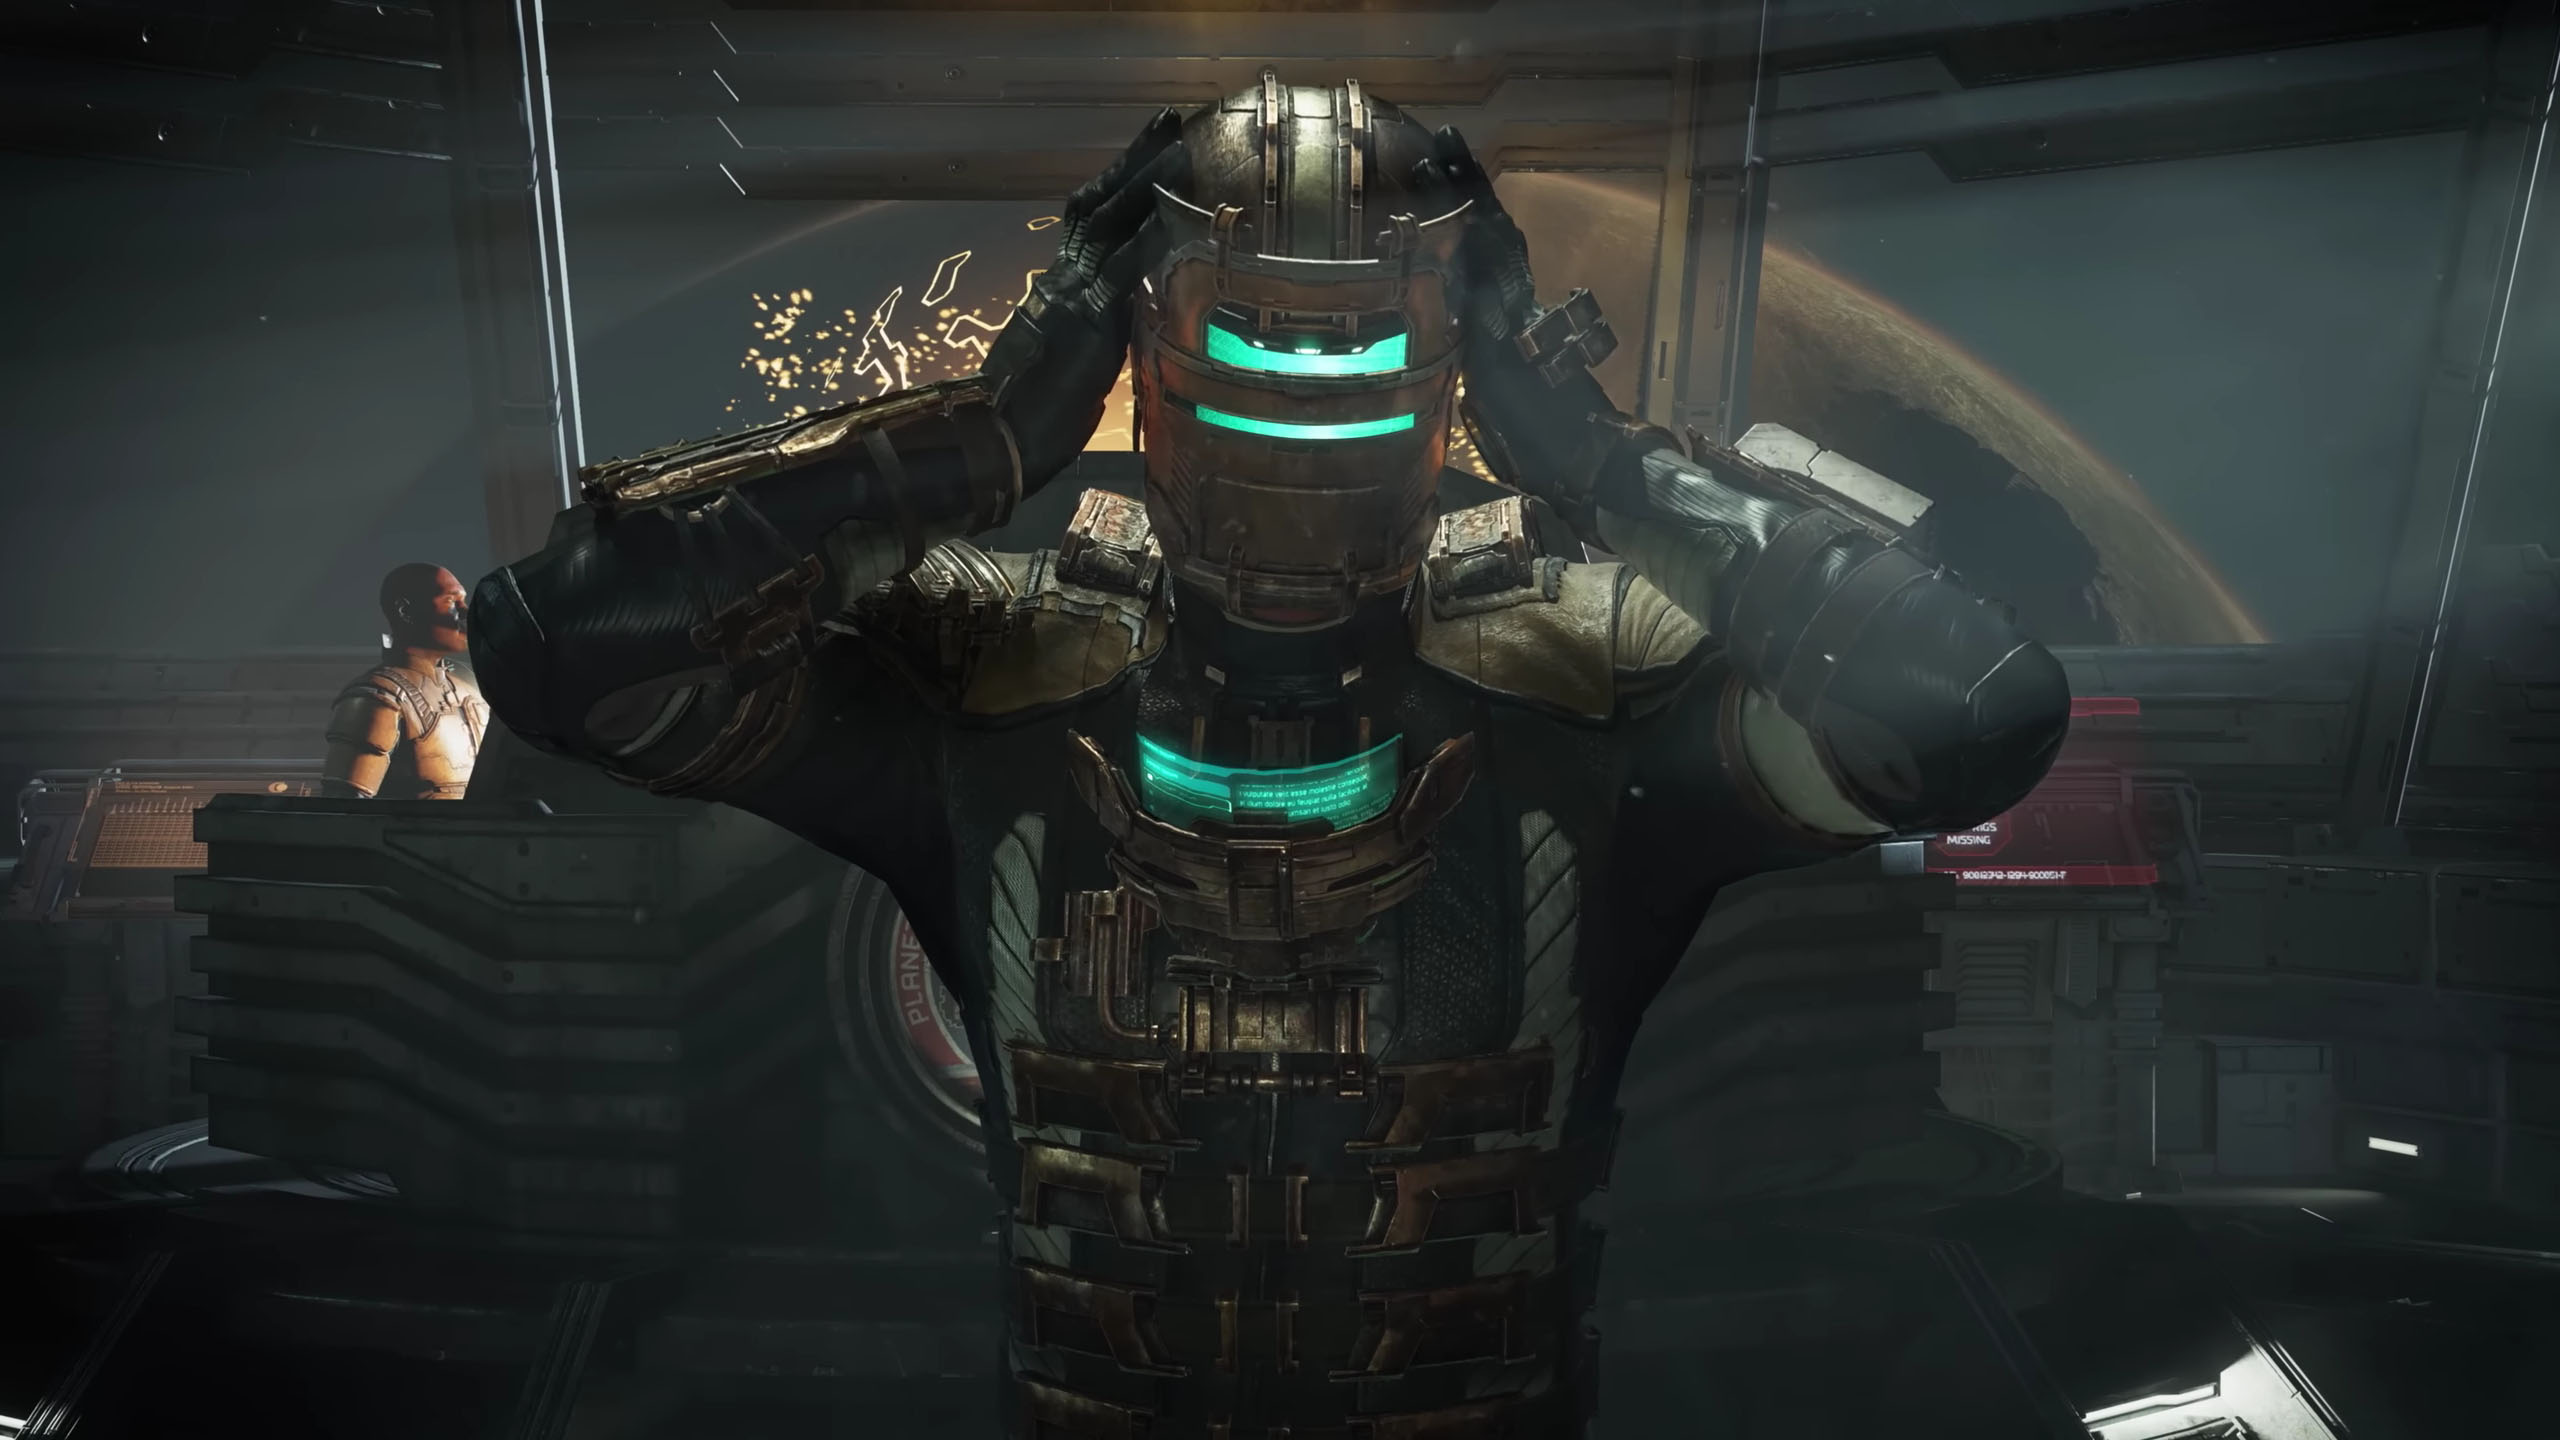 Dead Space remake gets spooky launch trailer